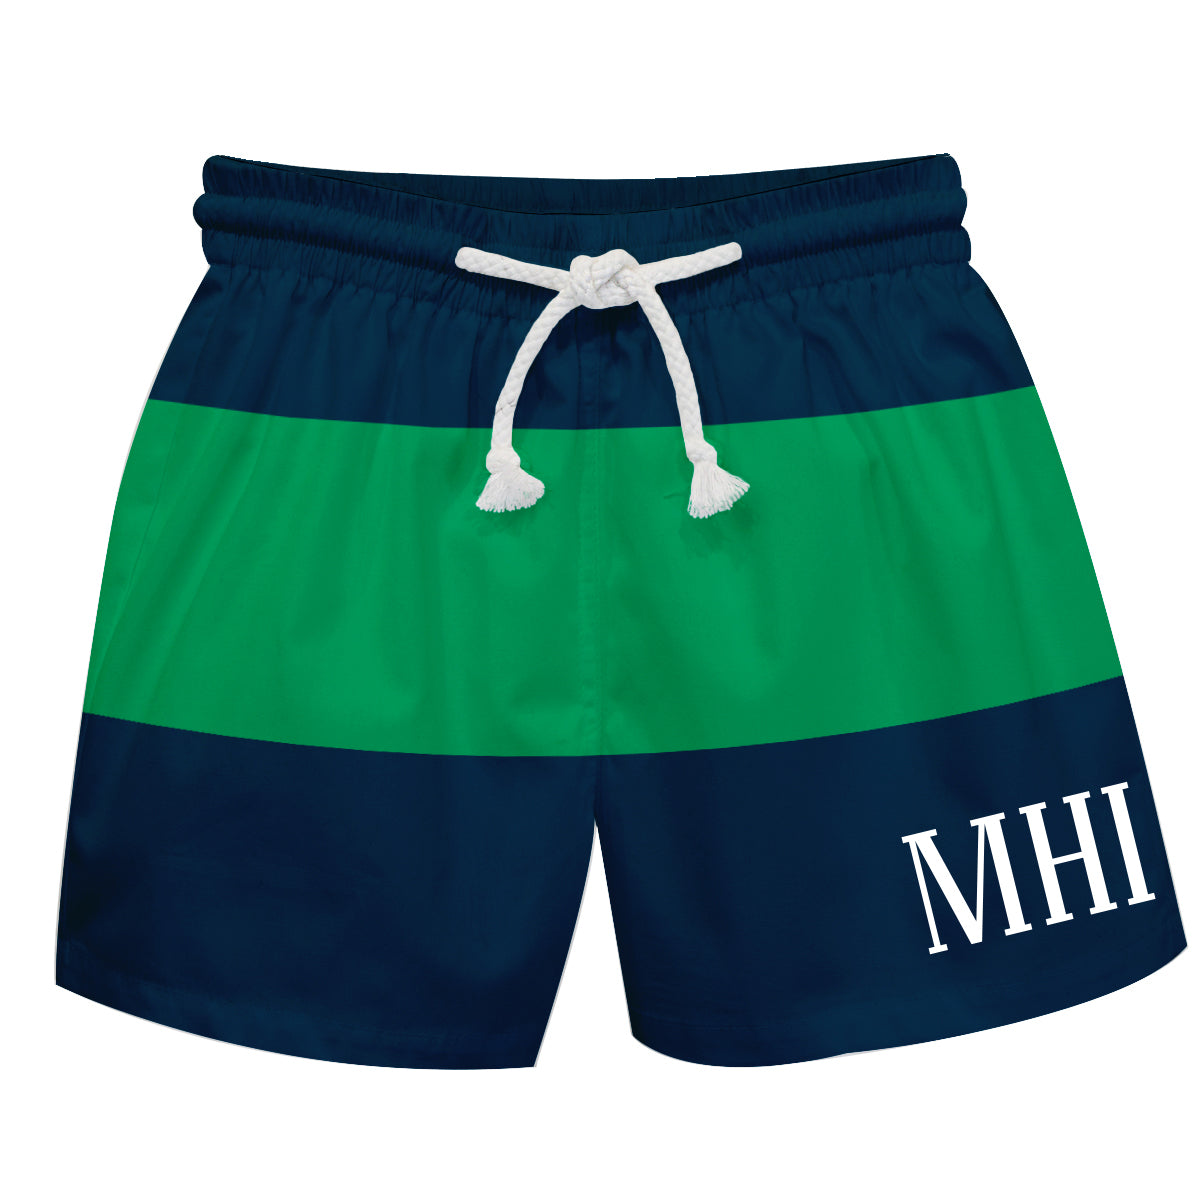 Personalized Monogram Navy and Green Stripes Swimtrunk - Wimziy&Co.